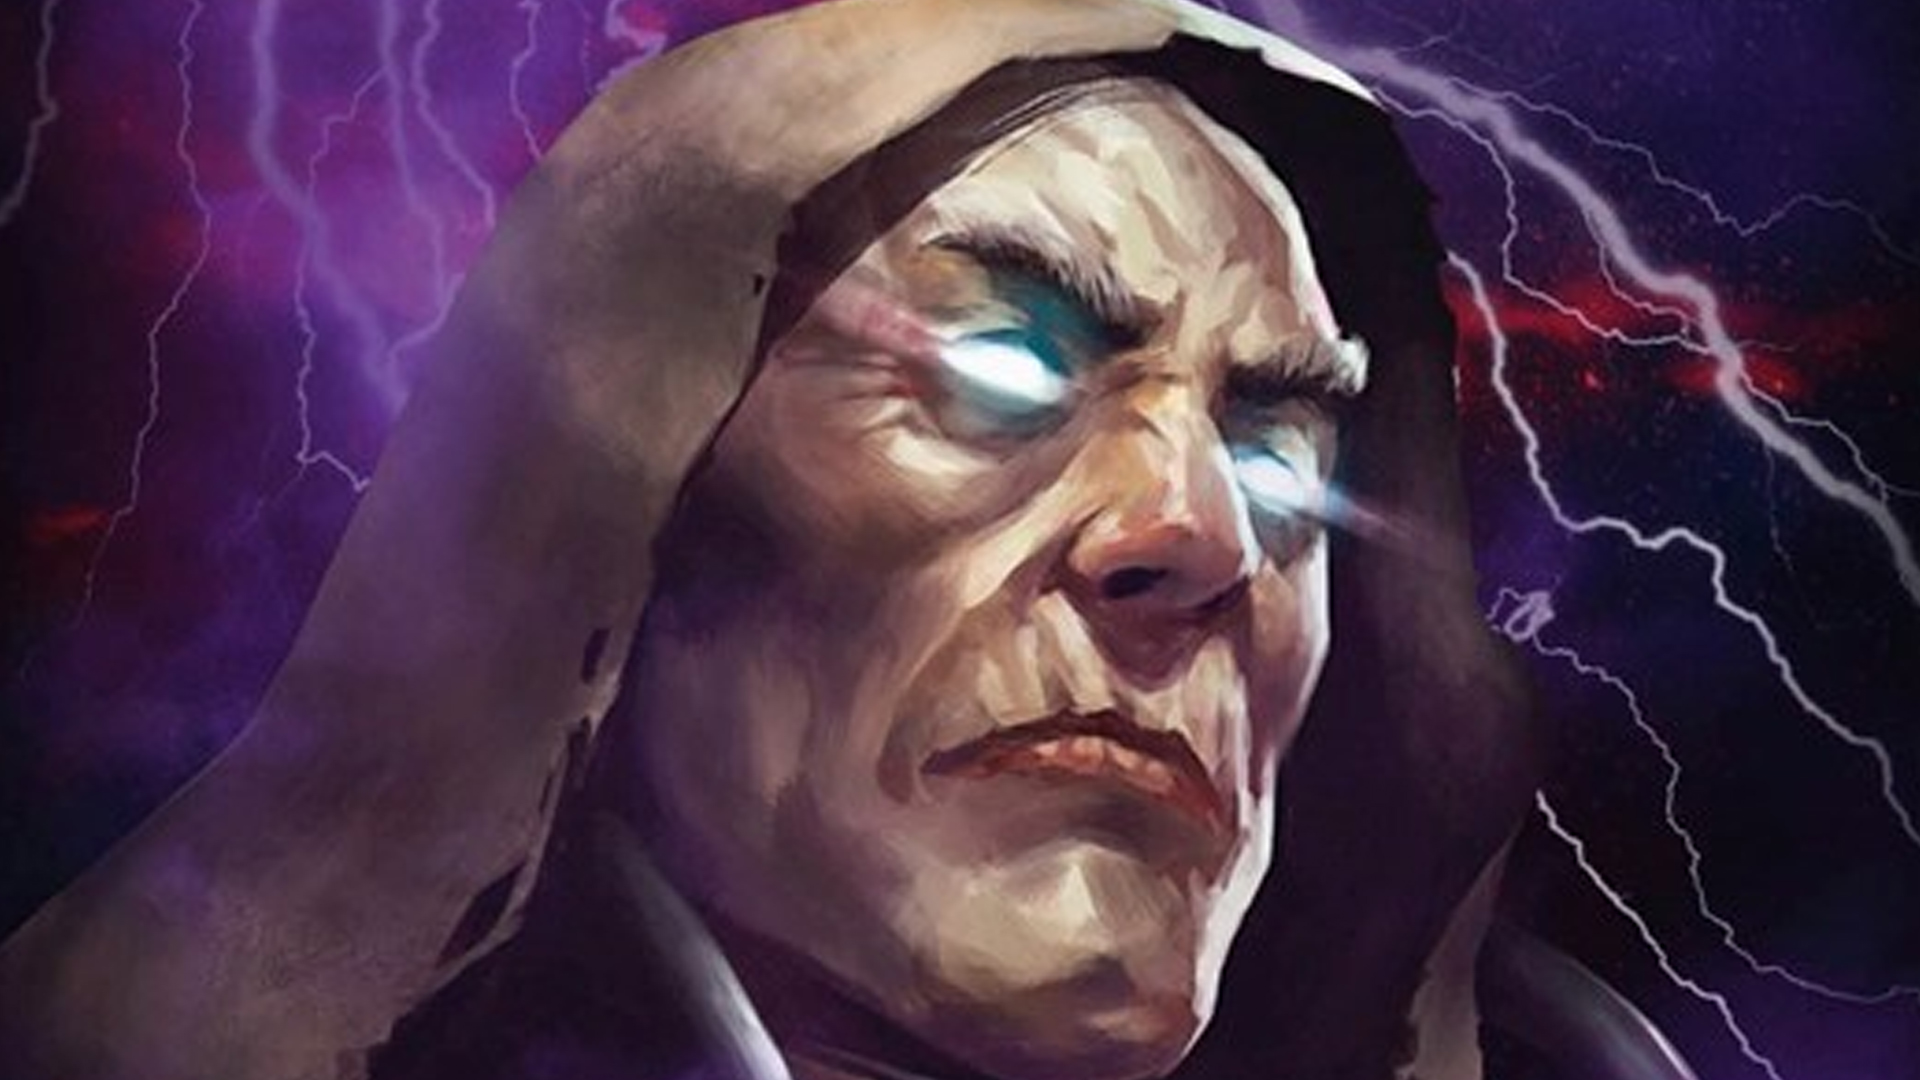 Warhammer 40k Malcador the Sigillite guide - Games Workshop artwork showing Malcador's hooded face with glowing eyes, channeling the warp